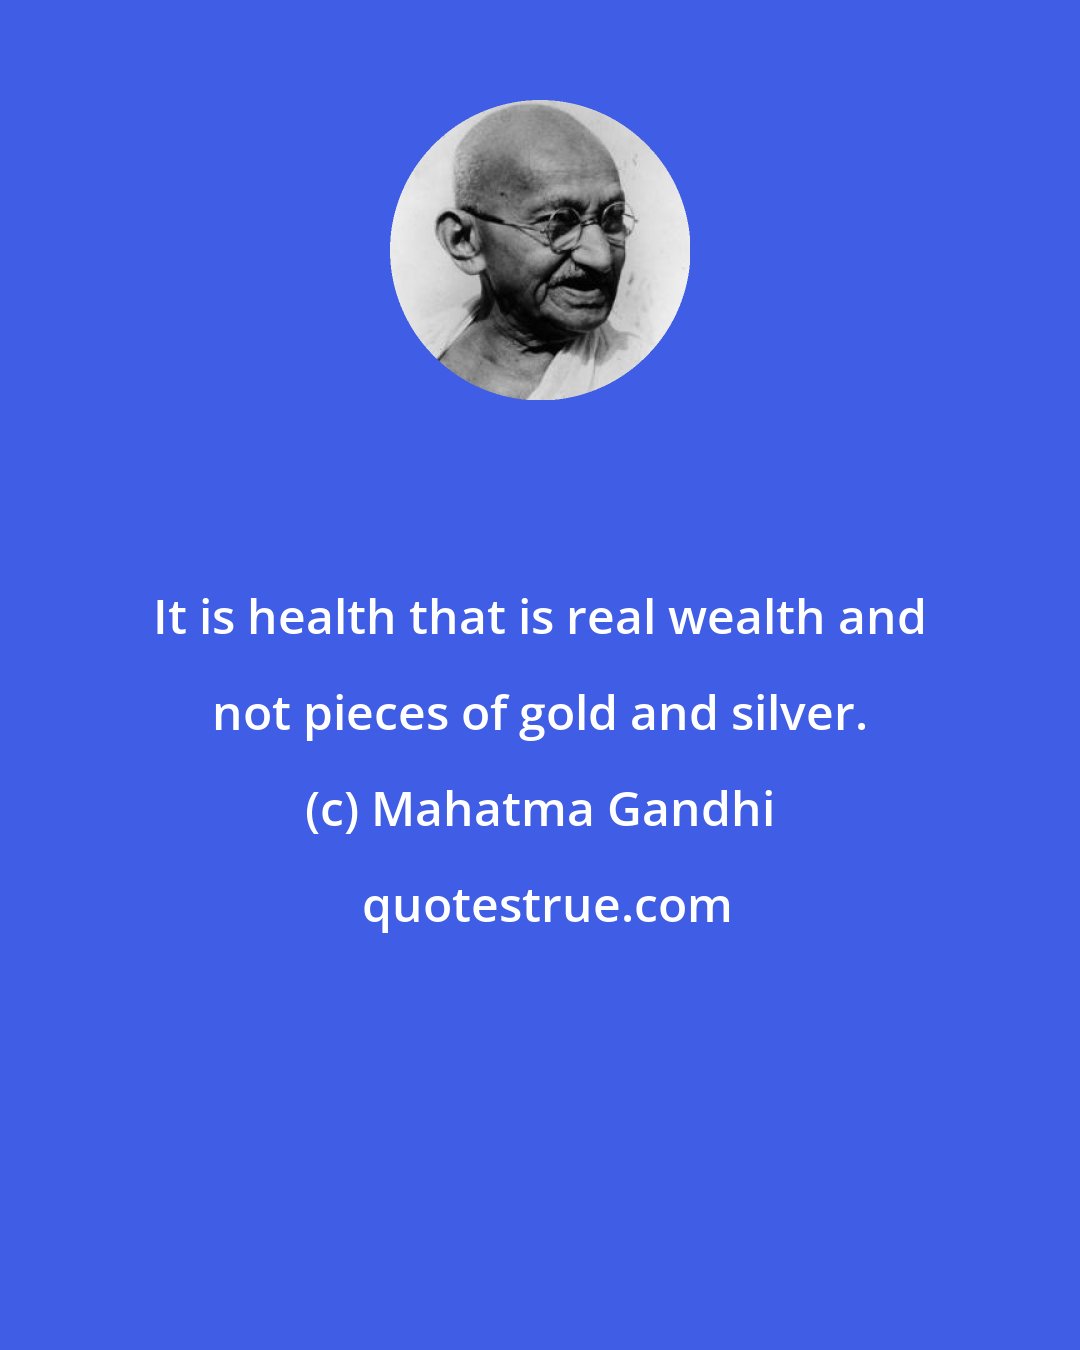 Mahatma Gandhi: It is health that is real wealth and not pieces of gold and silver.